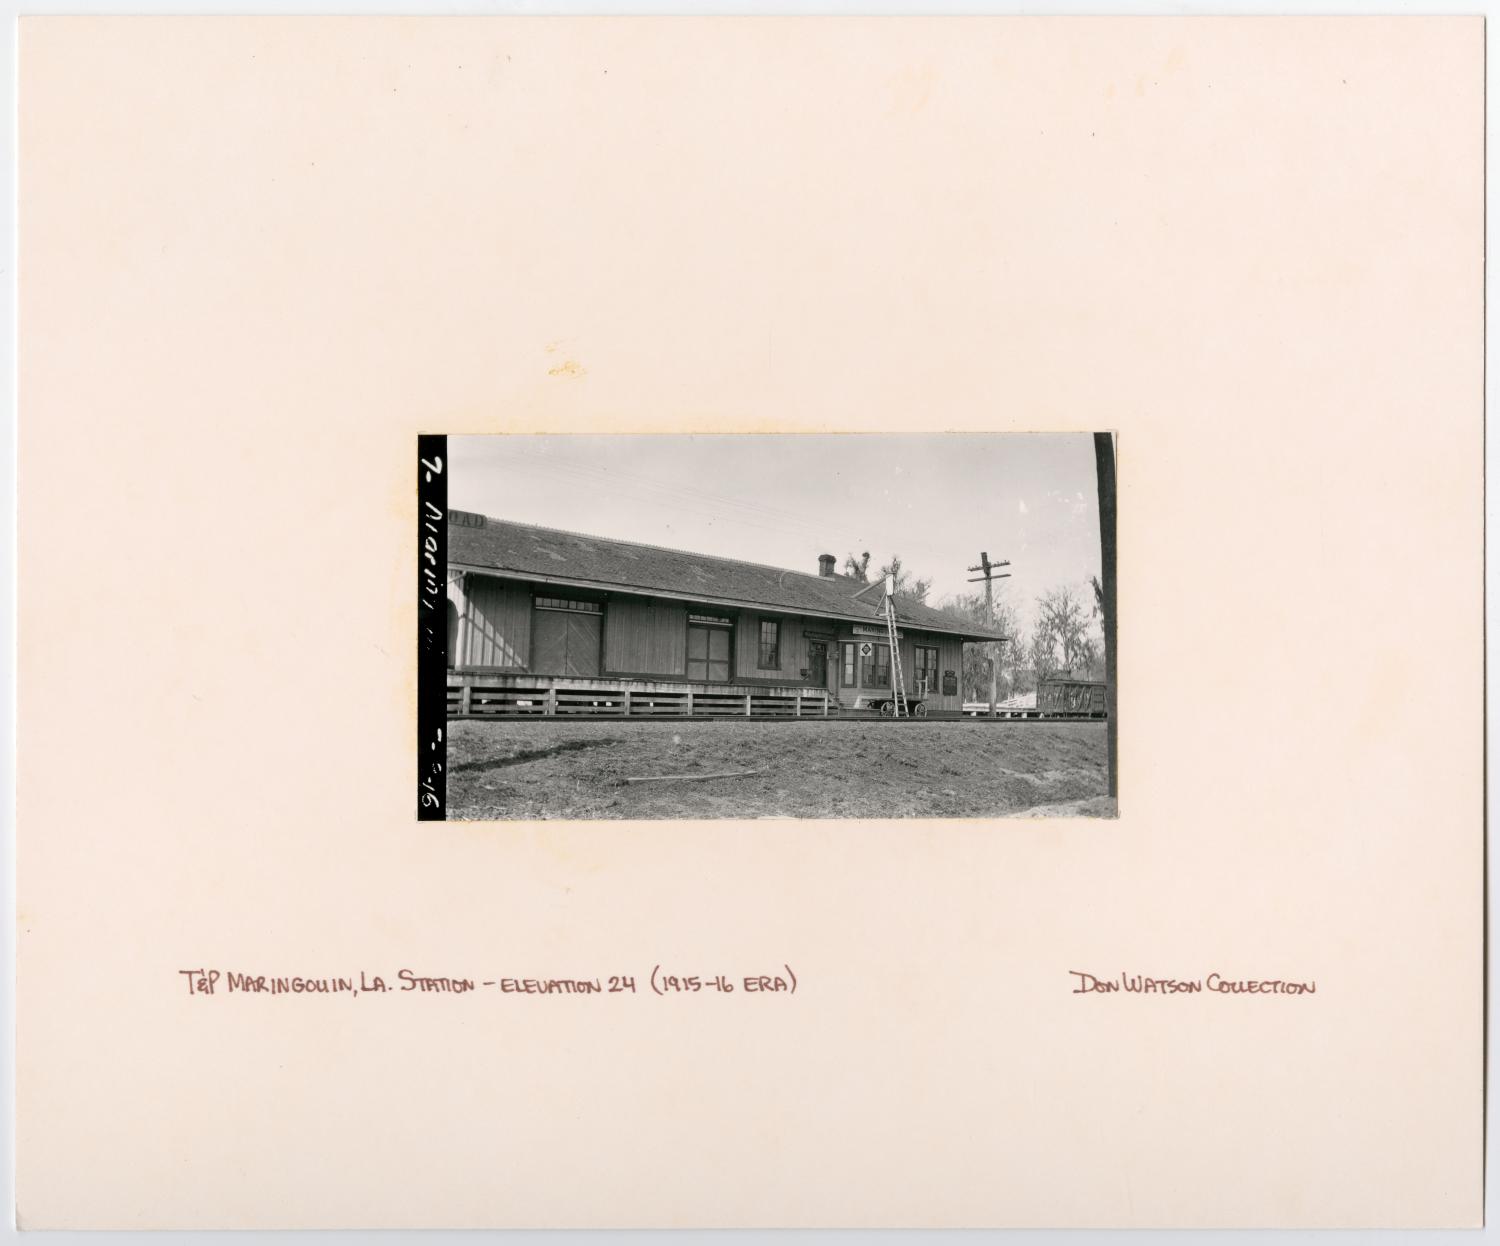 Images of Texas & Pacific Stations and Structures in Maringouin, LA